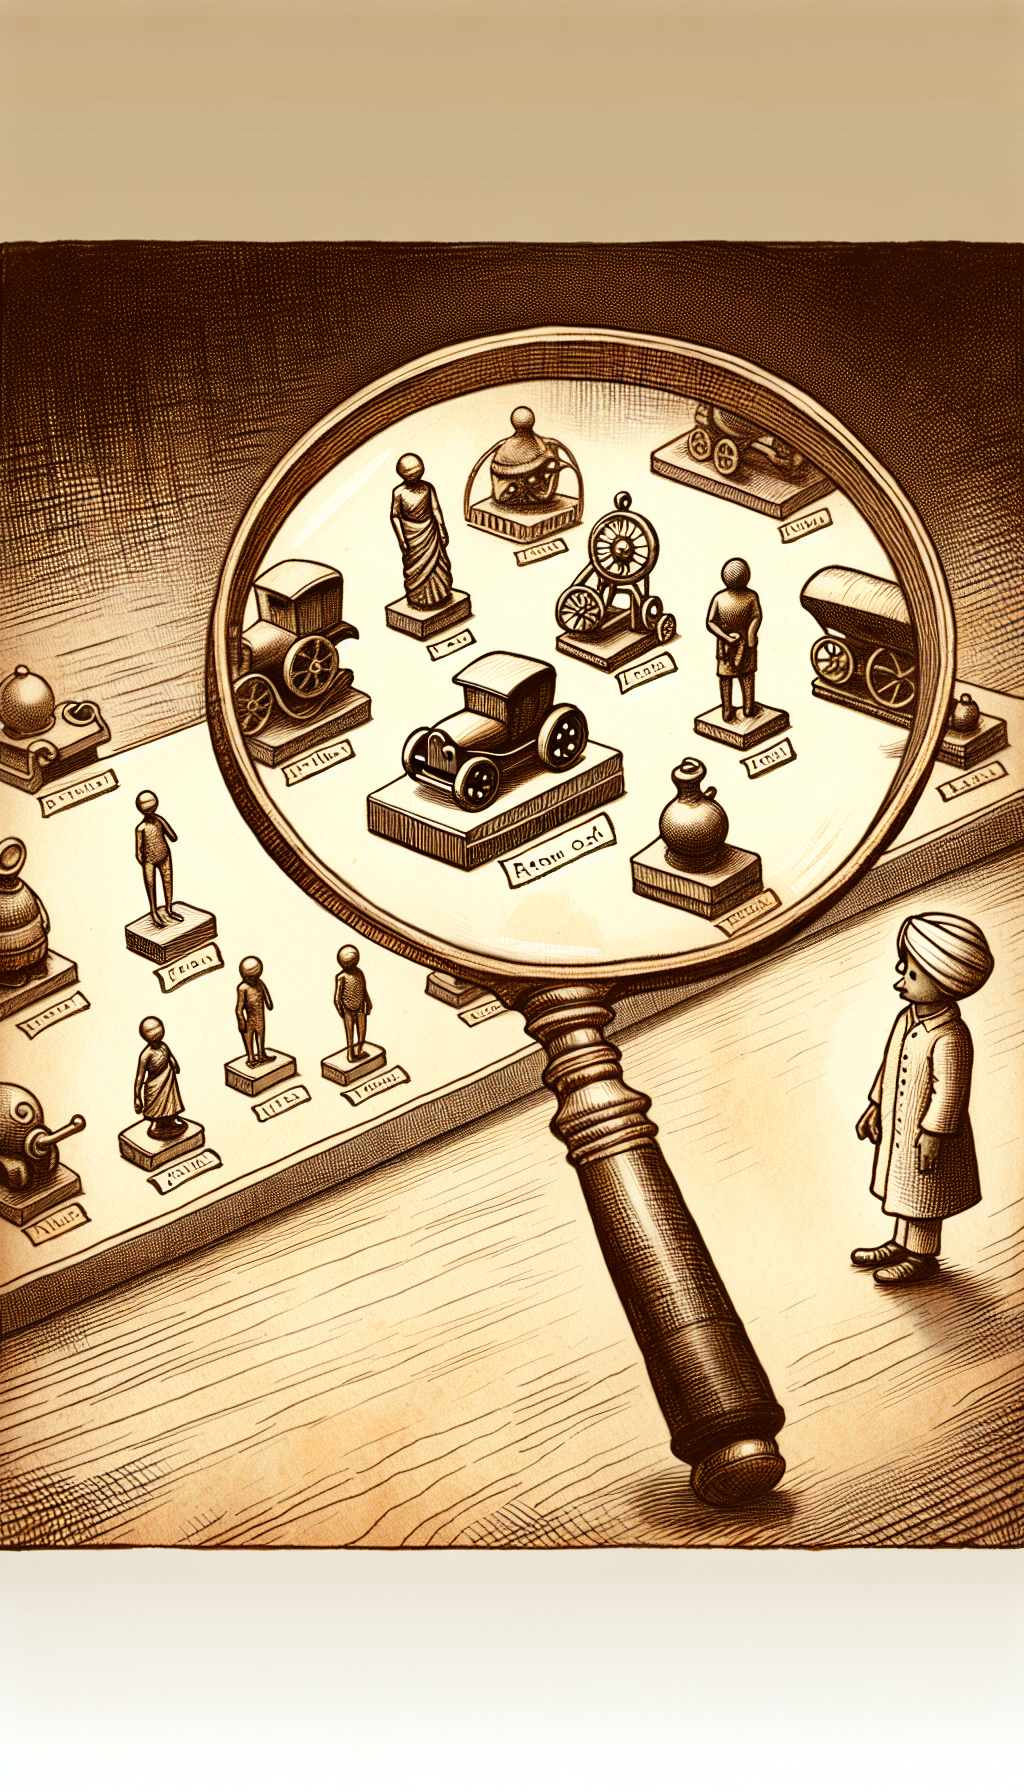 An intricate magnifying glass reveals a whimsical scene within its lens: a miniature appraiser examining a lineup of classic cast iron toys, with their rarity indicated by glowing auras. Each toy is perched on a pedestal labeled with condition grades from 'Mint' to 'Played With,' symbolizing their respective values. The image is rendered in a sepia-toned ink sketch style, infusing an antique aura.